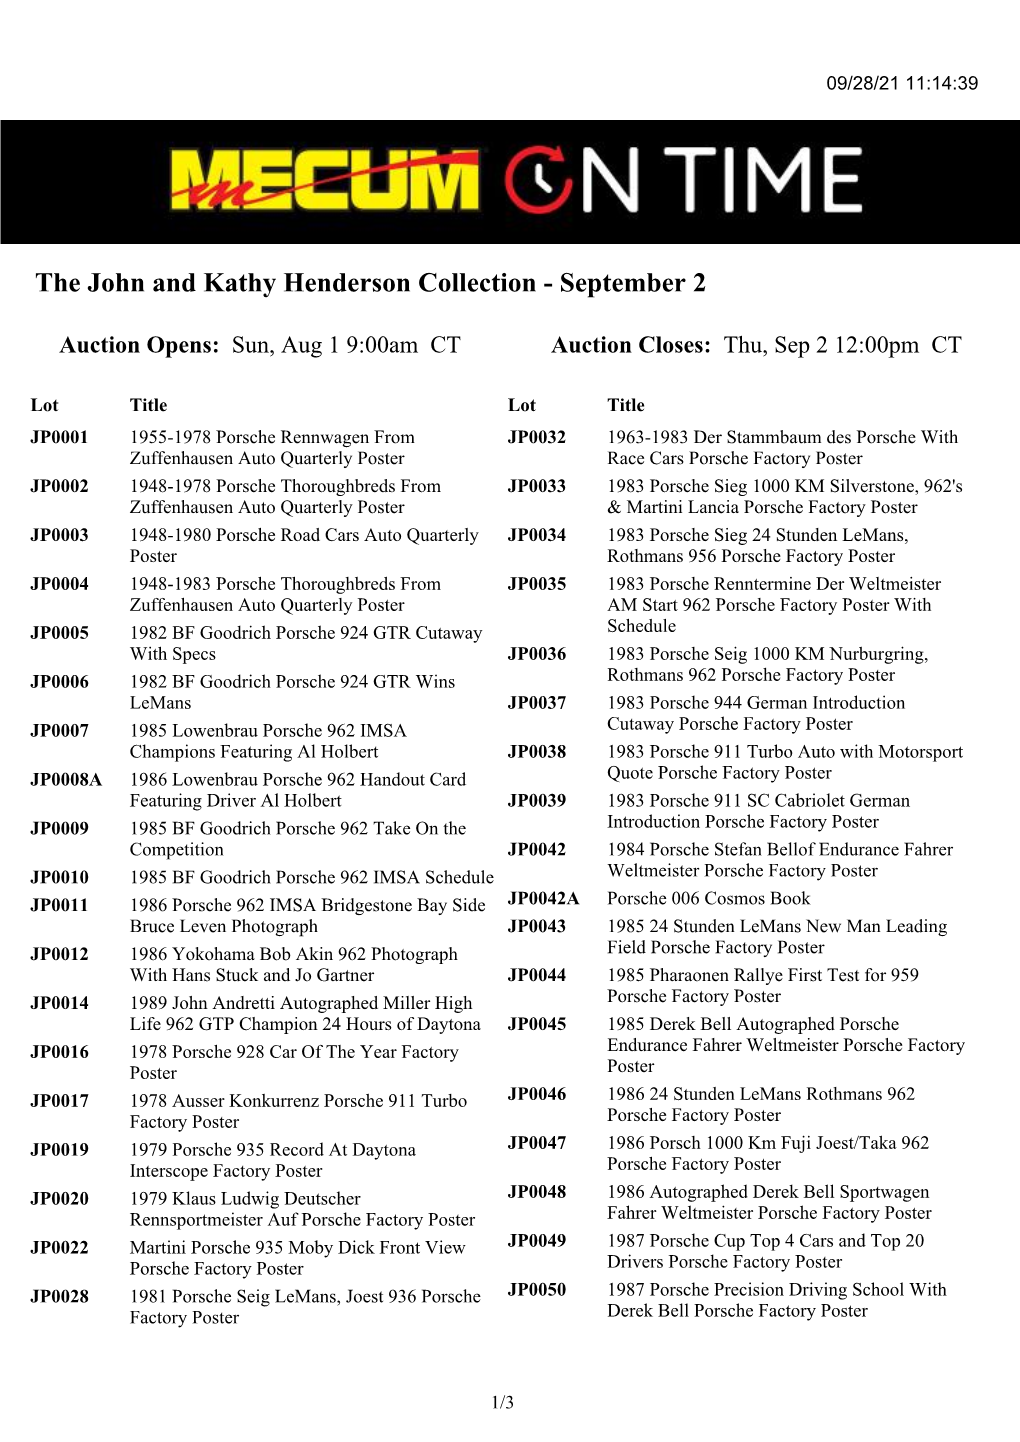 The John and Kathy Henderson Collection - September 2